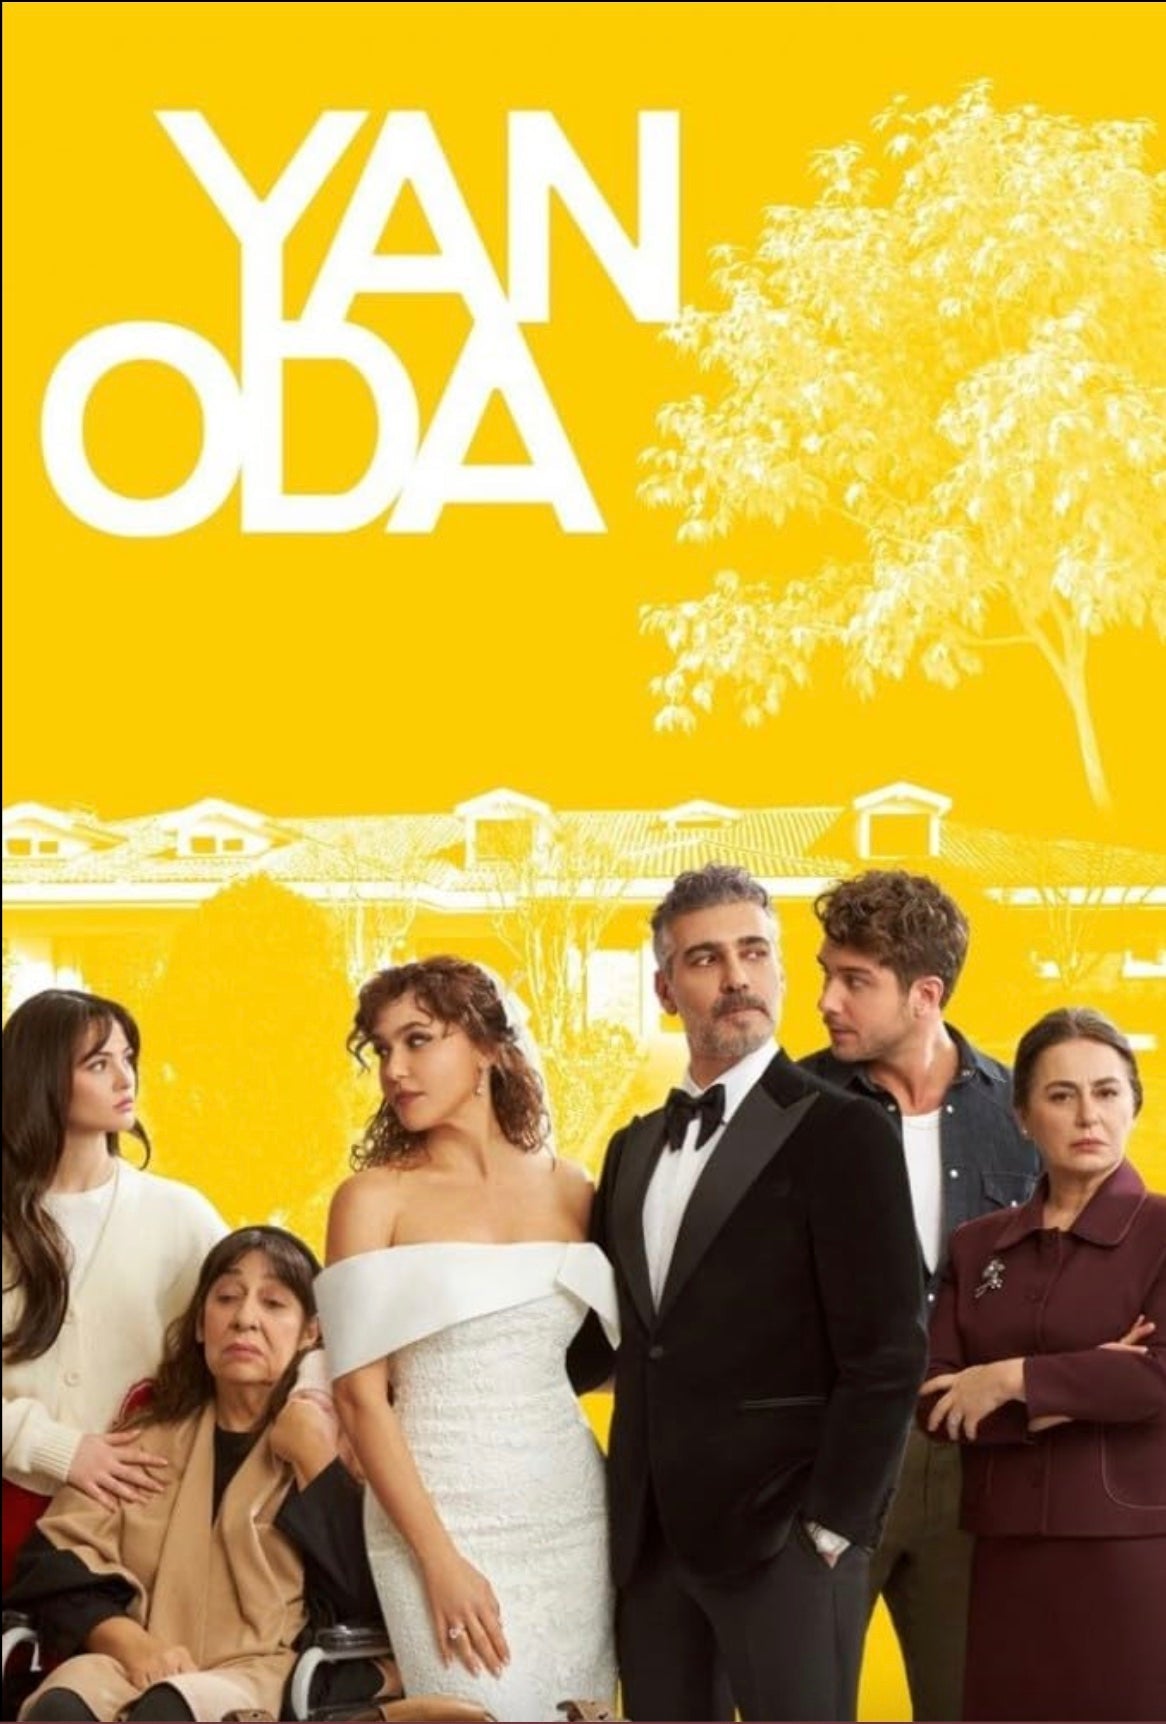 Yan Oda (Next Room) Complete Series | All Episodes in Full 1080HD, Original Voices with English, Spanish, Italian, Arabic Subtitles | No Commercials, No Adverts - Turkish TV Series